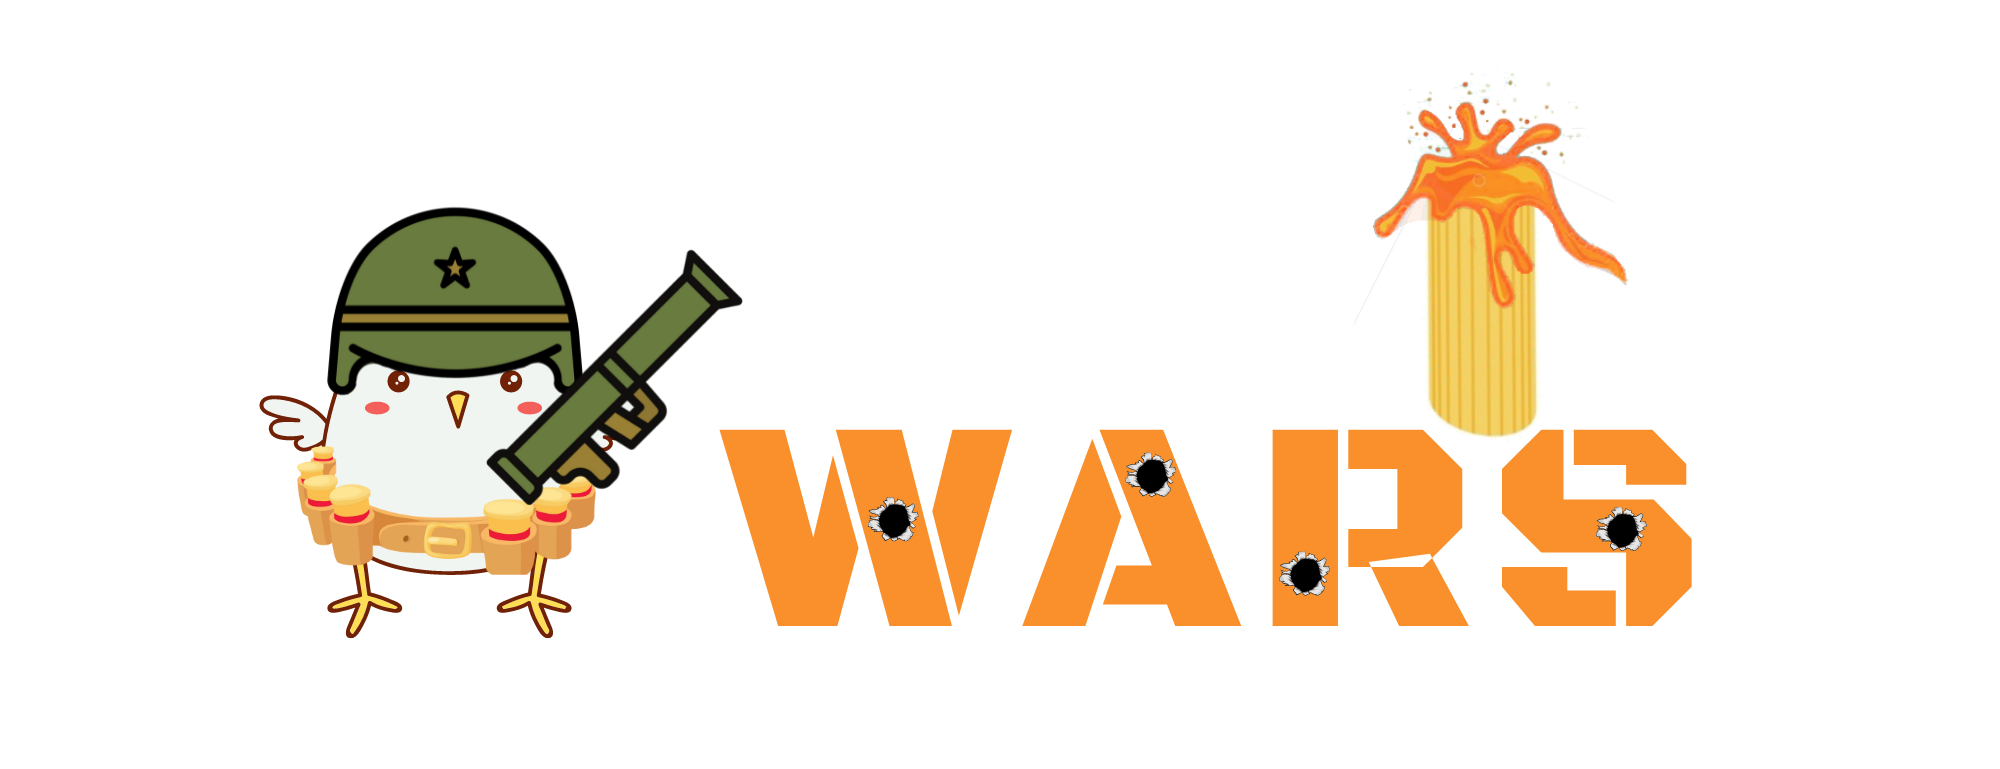 Riggie Wars | The Ultimate Chicken Riggies Cook-off